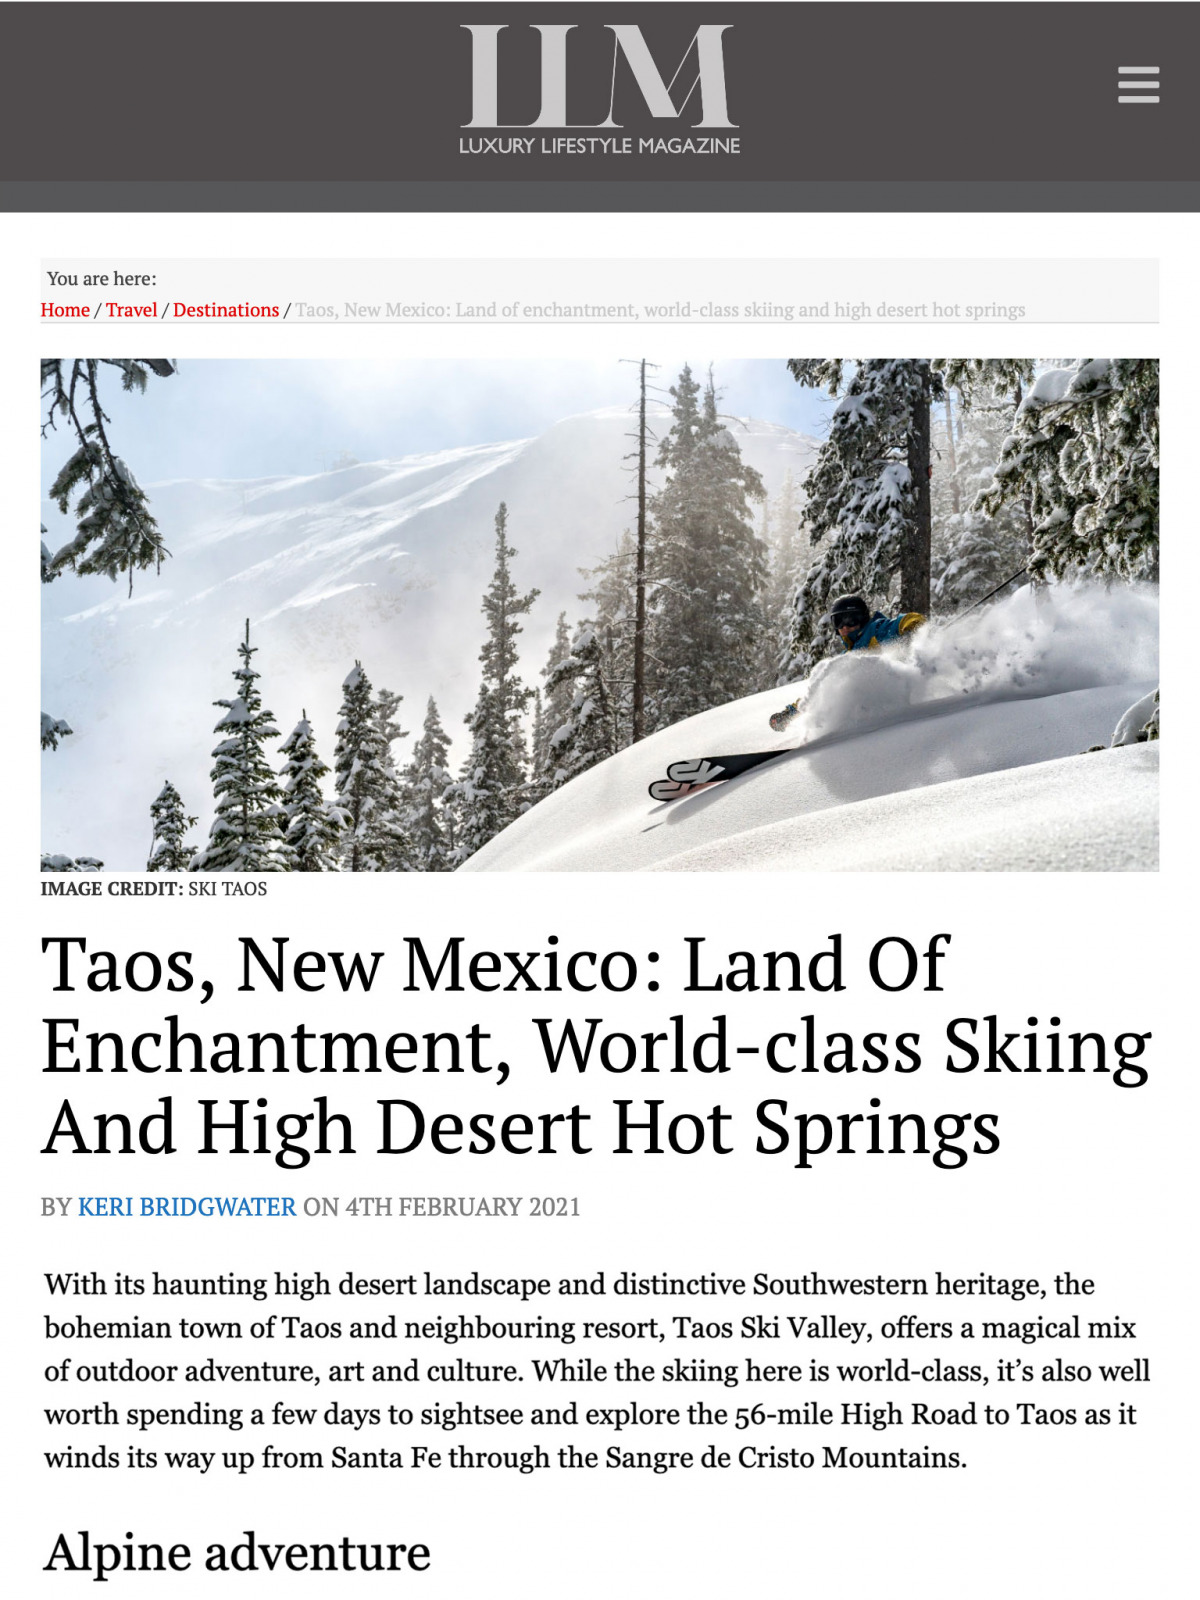 Taos, New Mexico: Land of enchantment, world-class skiing and high desert hot springs | Luxury Lifestyle Magazine February 2021